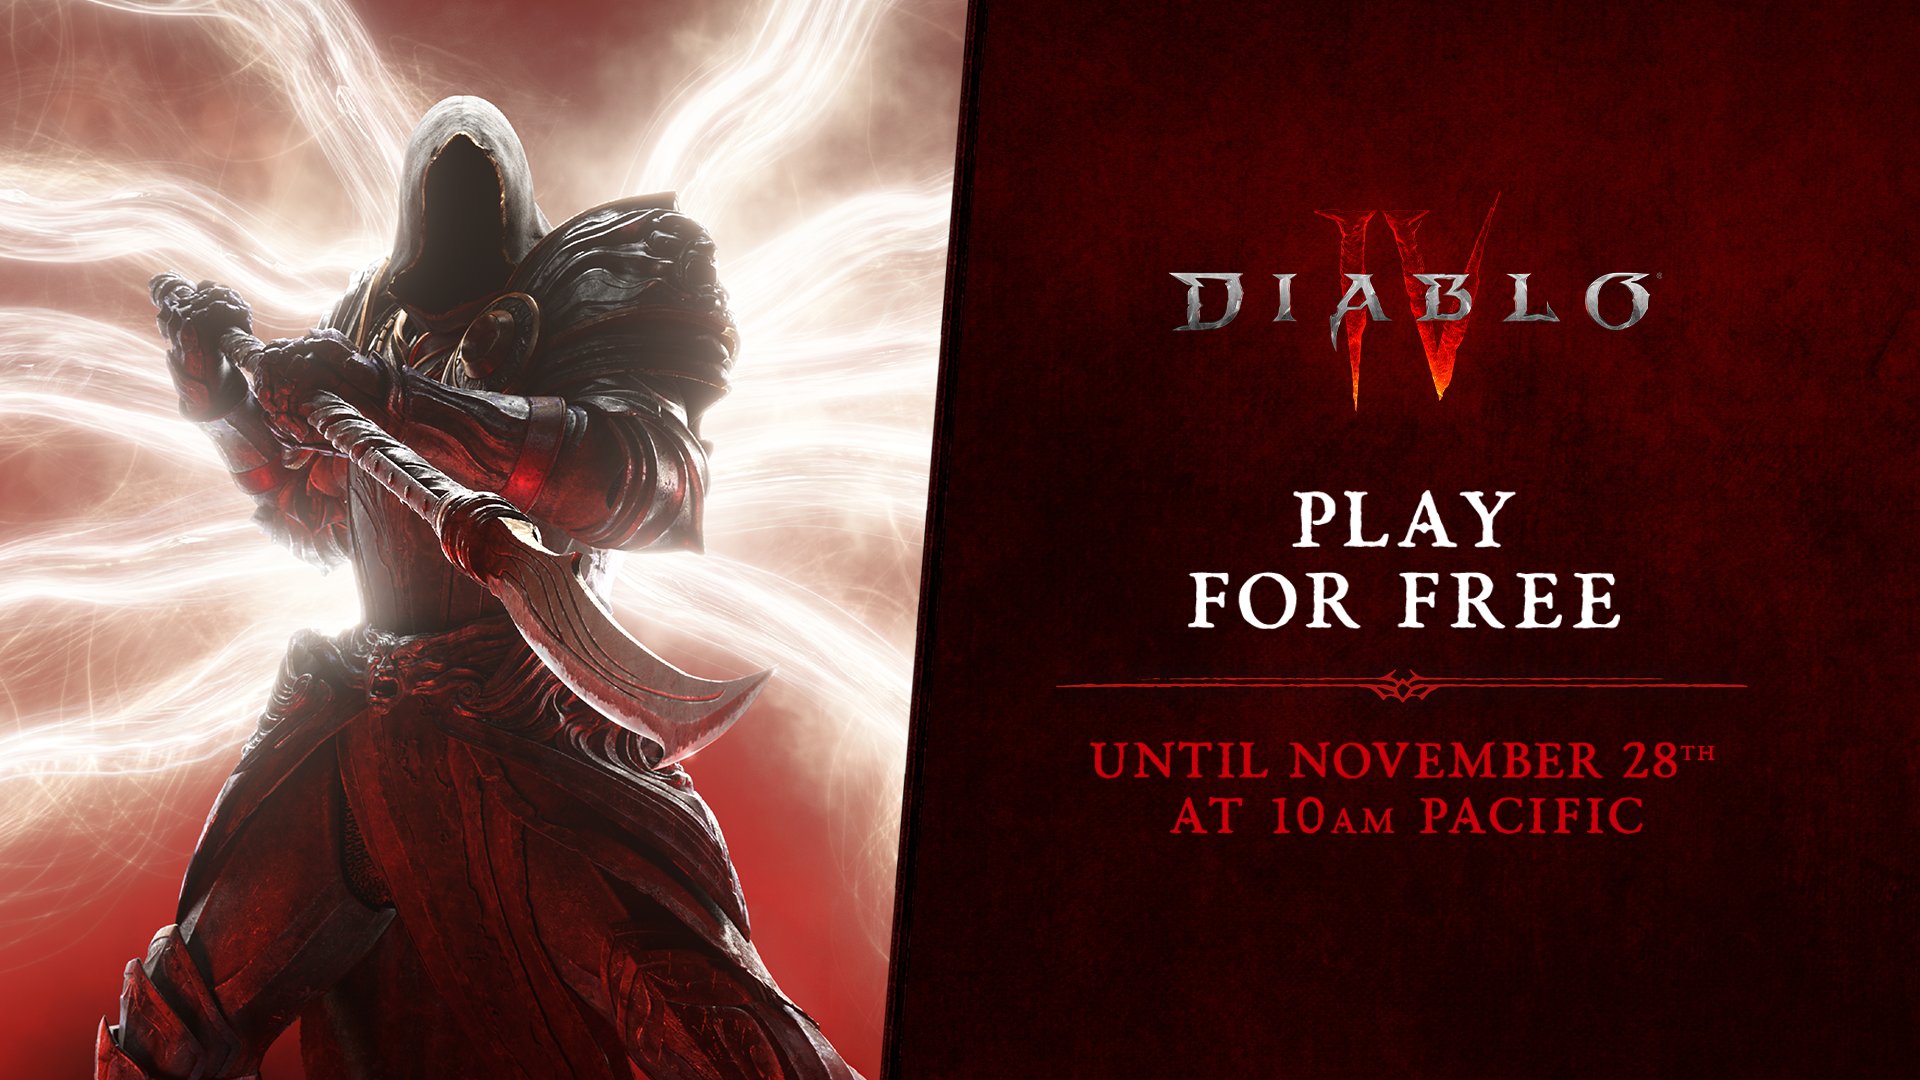 Diablo 4 is having a free trial on Steam for the first time ever